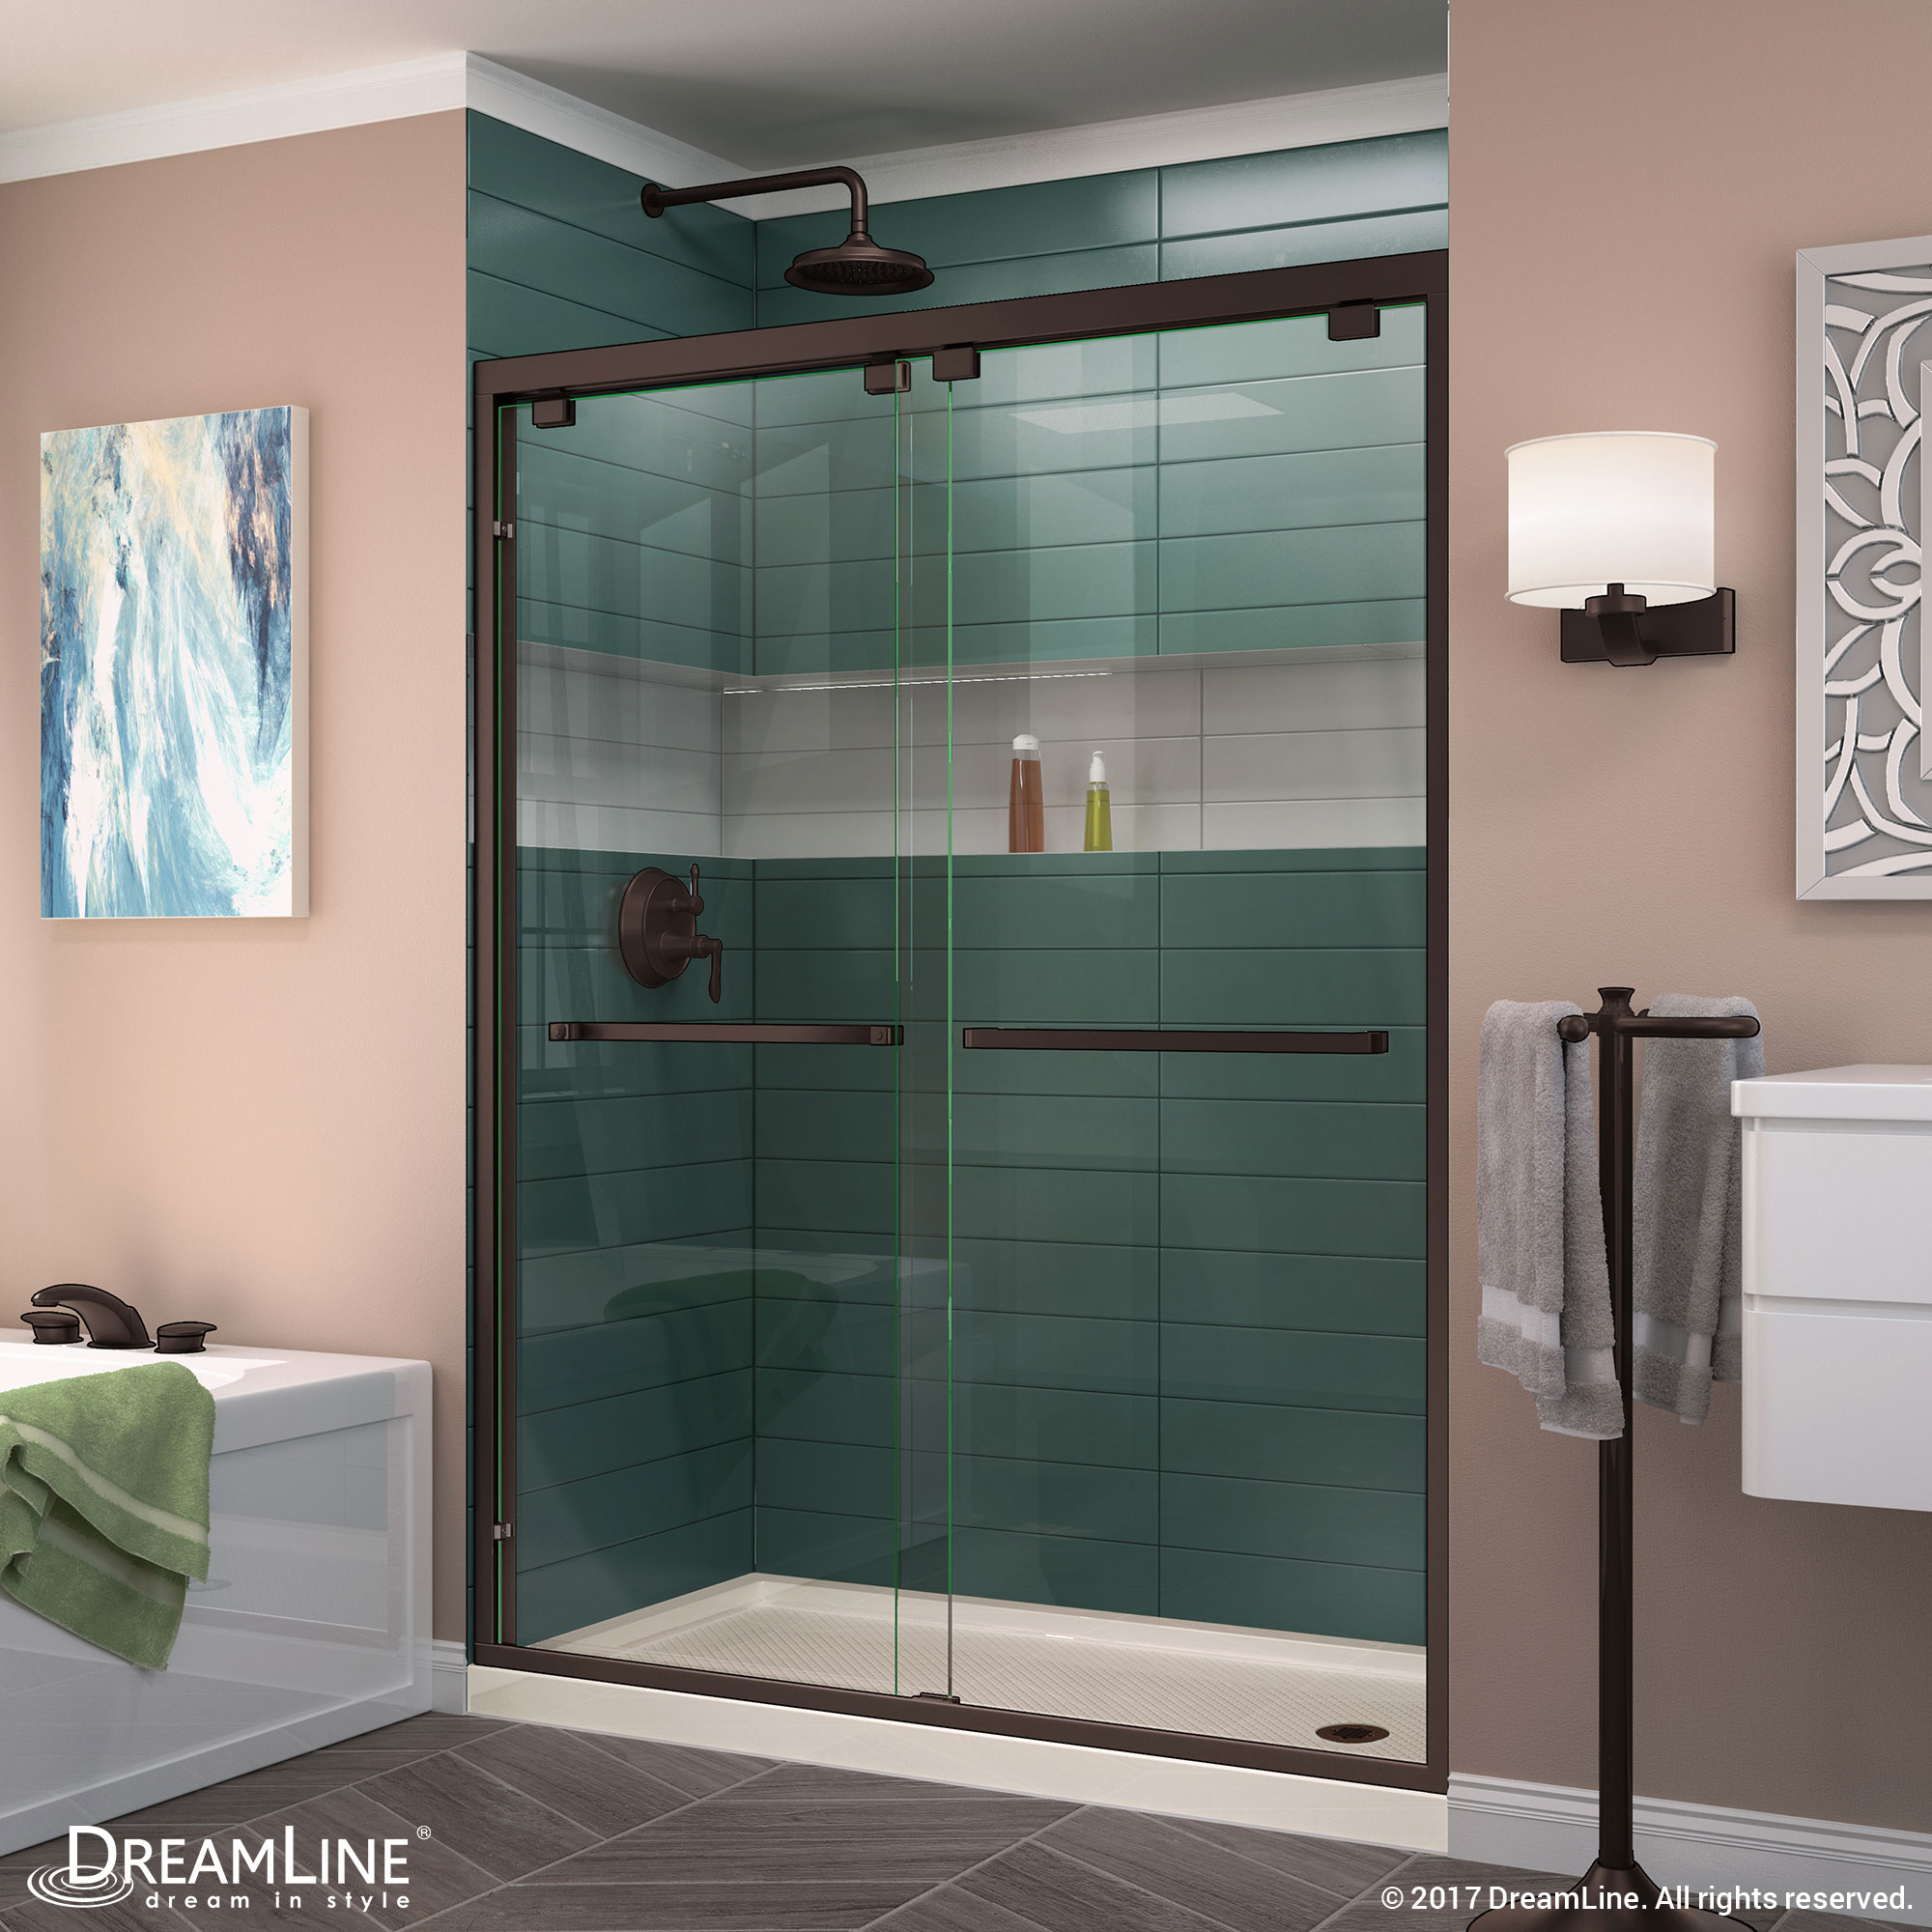 DreamLine Encore 30 in. D x 60 in. W x 78 3/4 in. H Bypass Shower Door in Brushed Nickel and Right Drain Biscuit Base Kit